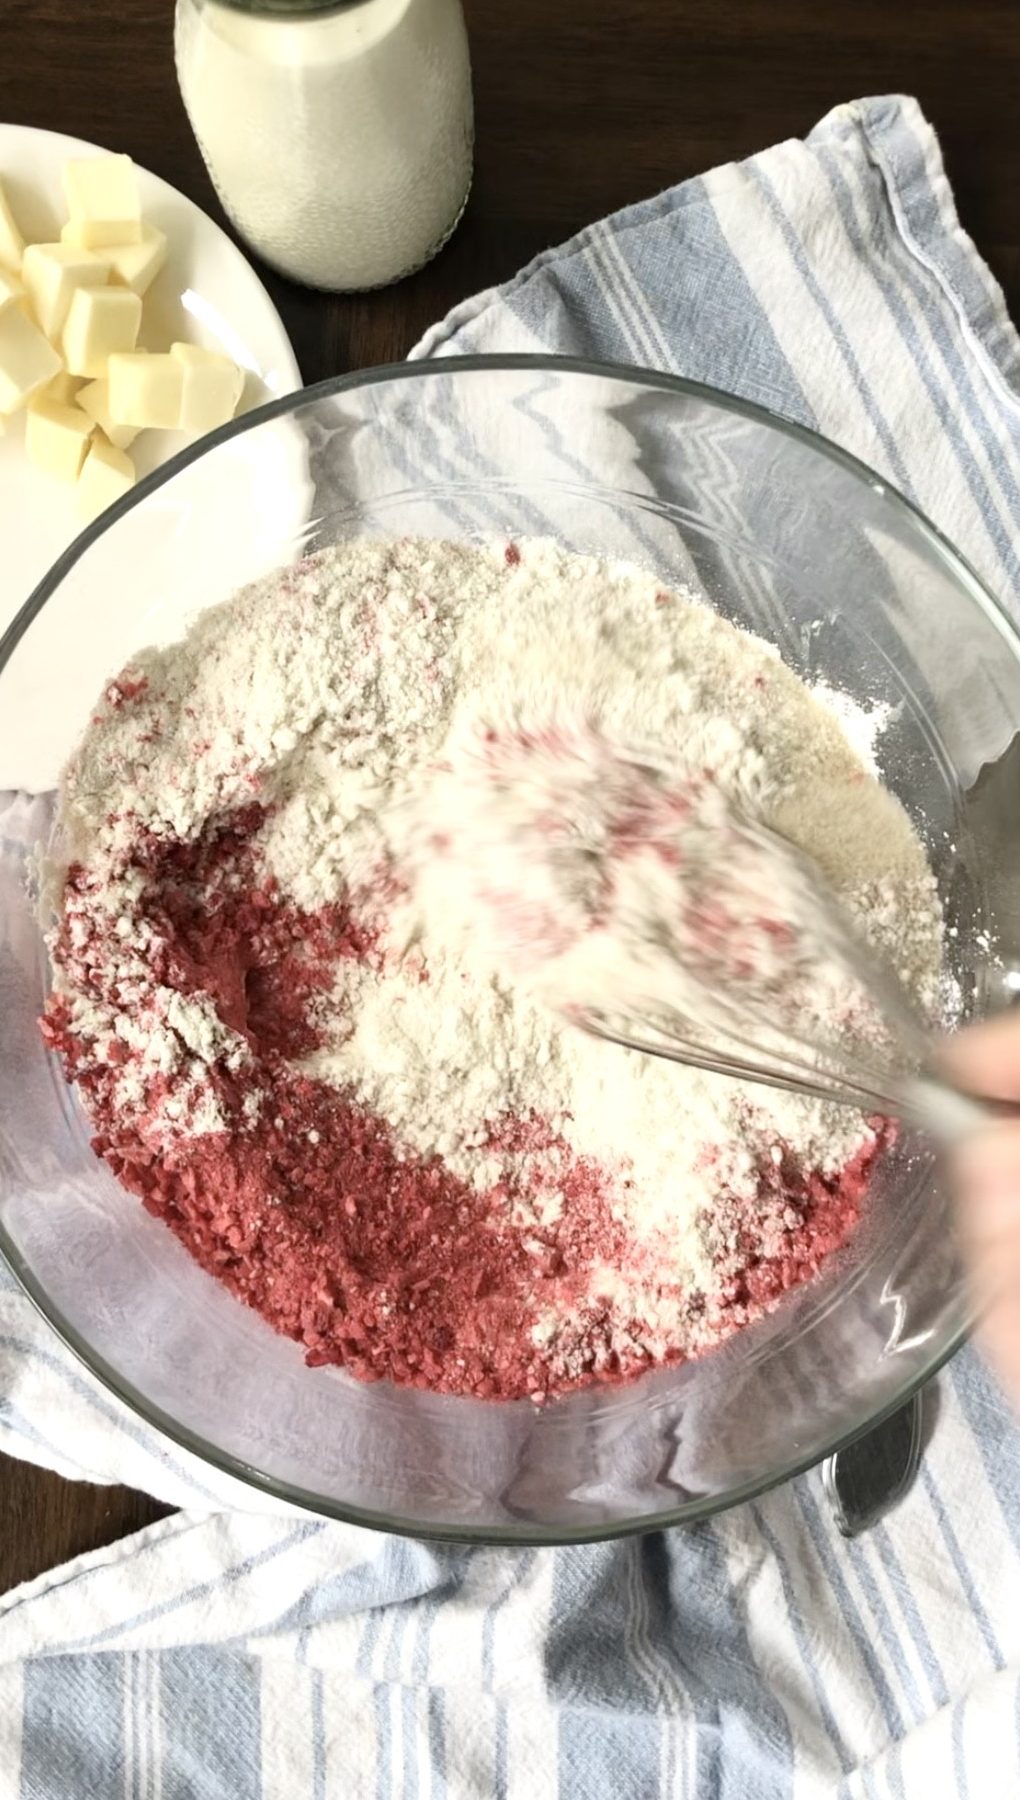 Whisking together the dry ingredients--flour, sugar, crushed freeze-dried strawberries, and baking powder and soda.